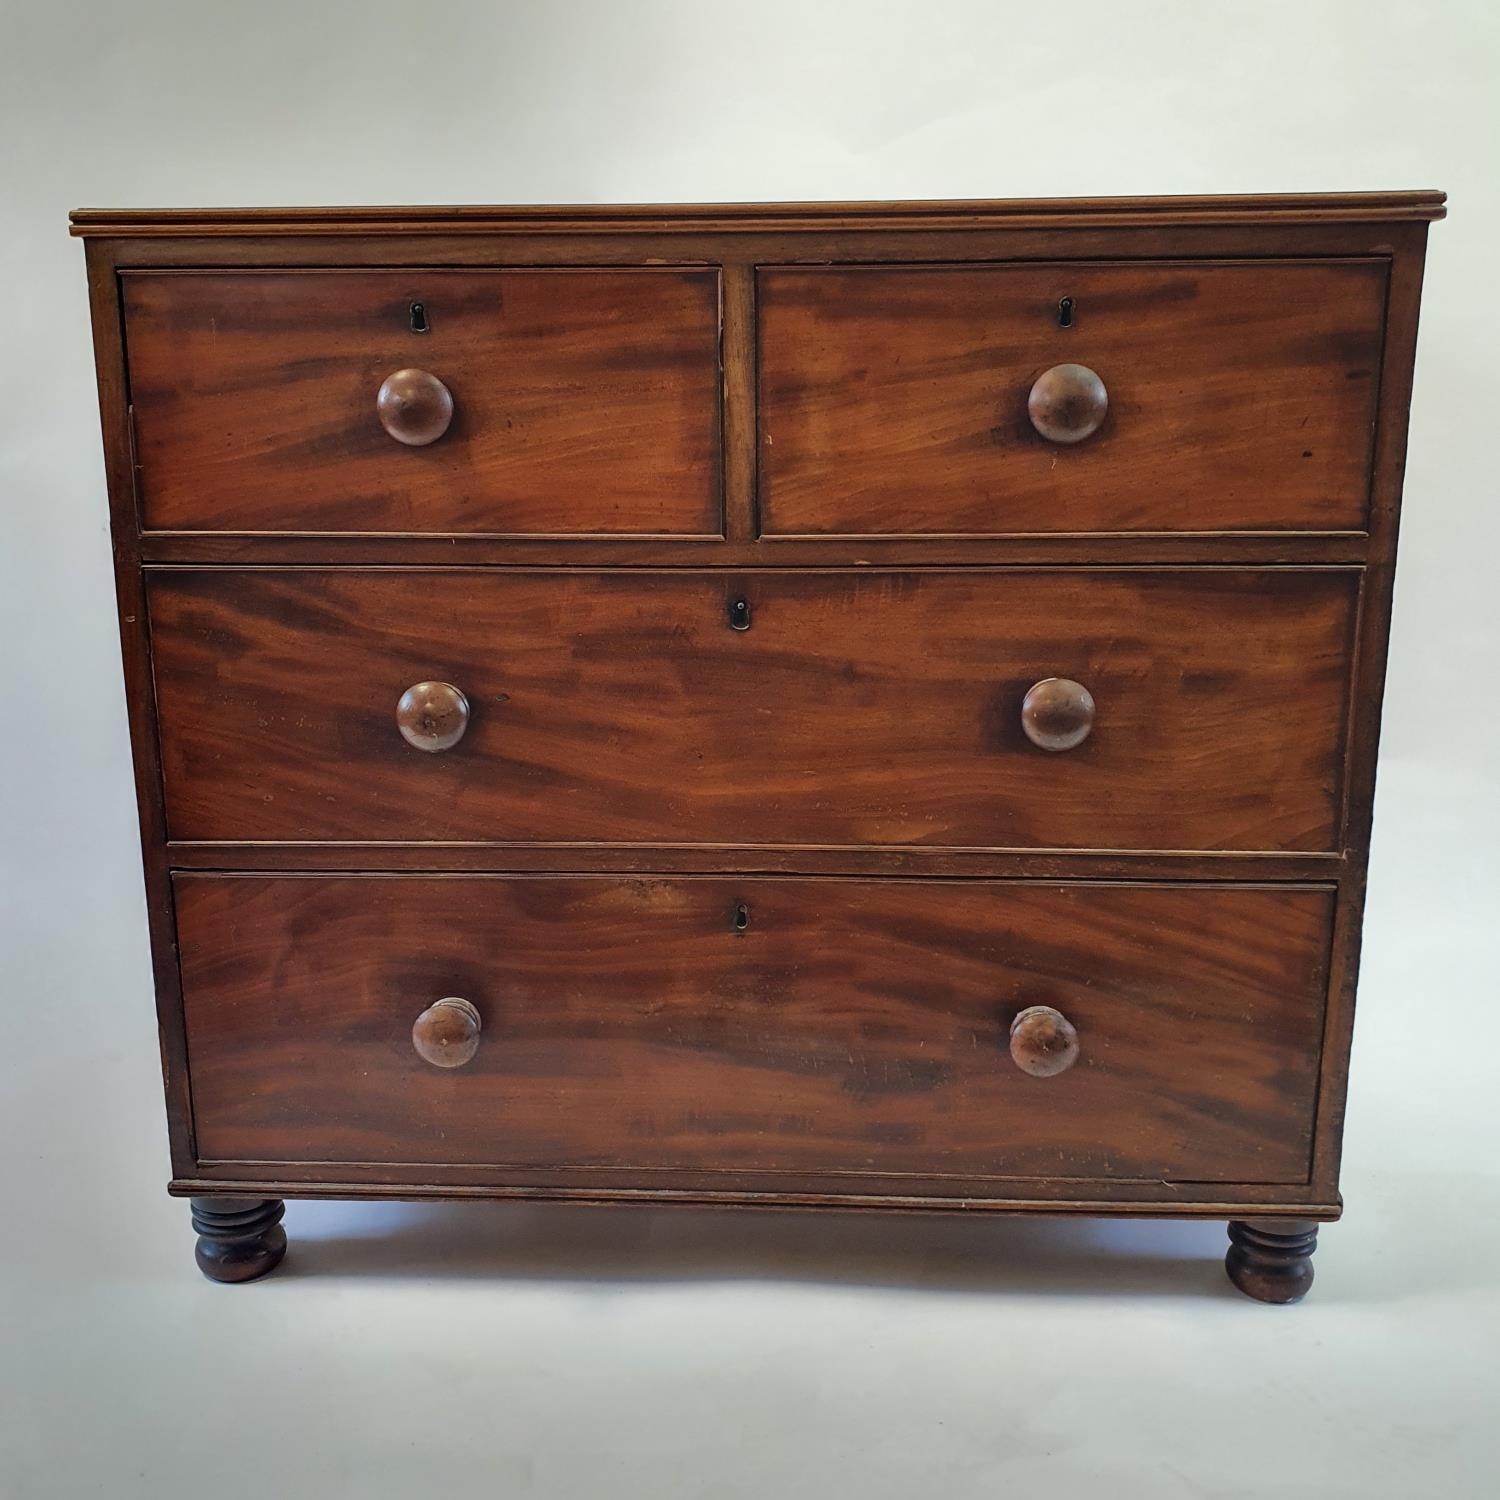 A 19th century mahogany chest, having two short and two long drawers, 93 cm wide